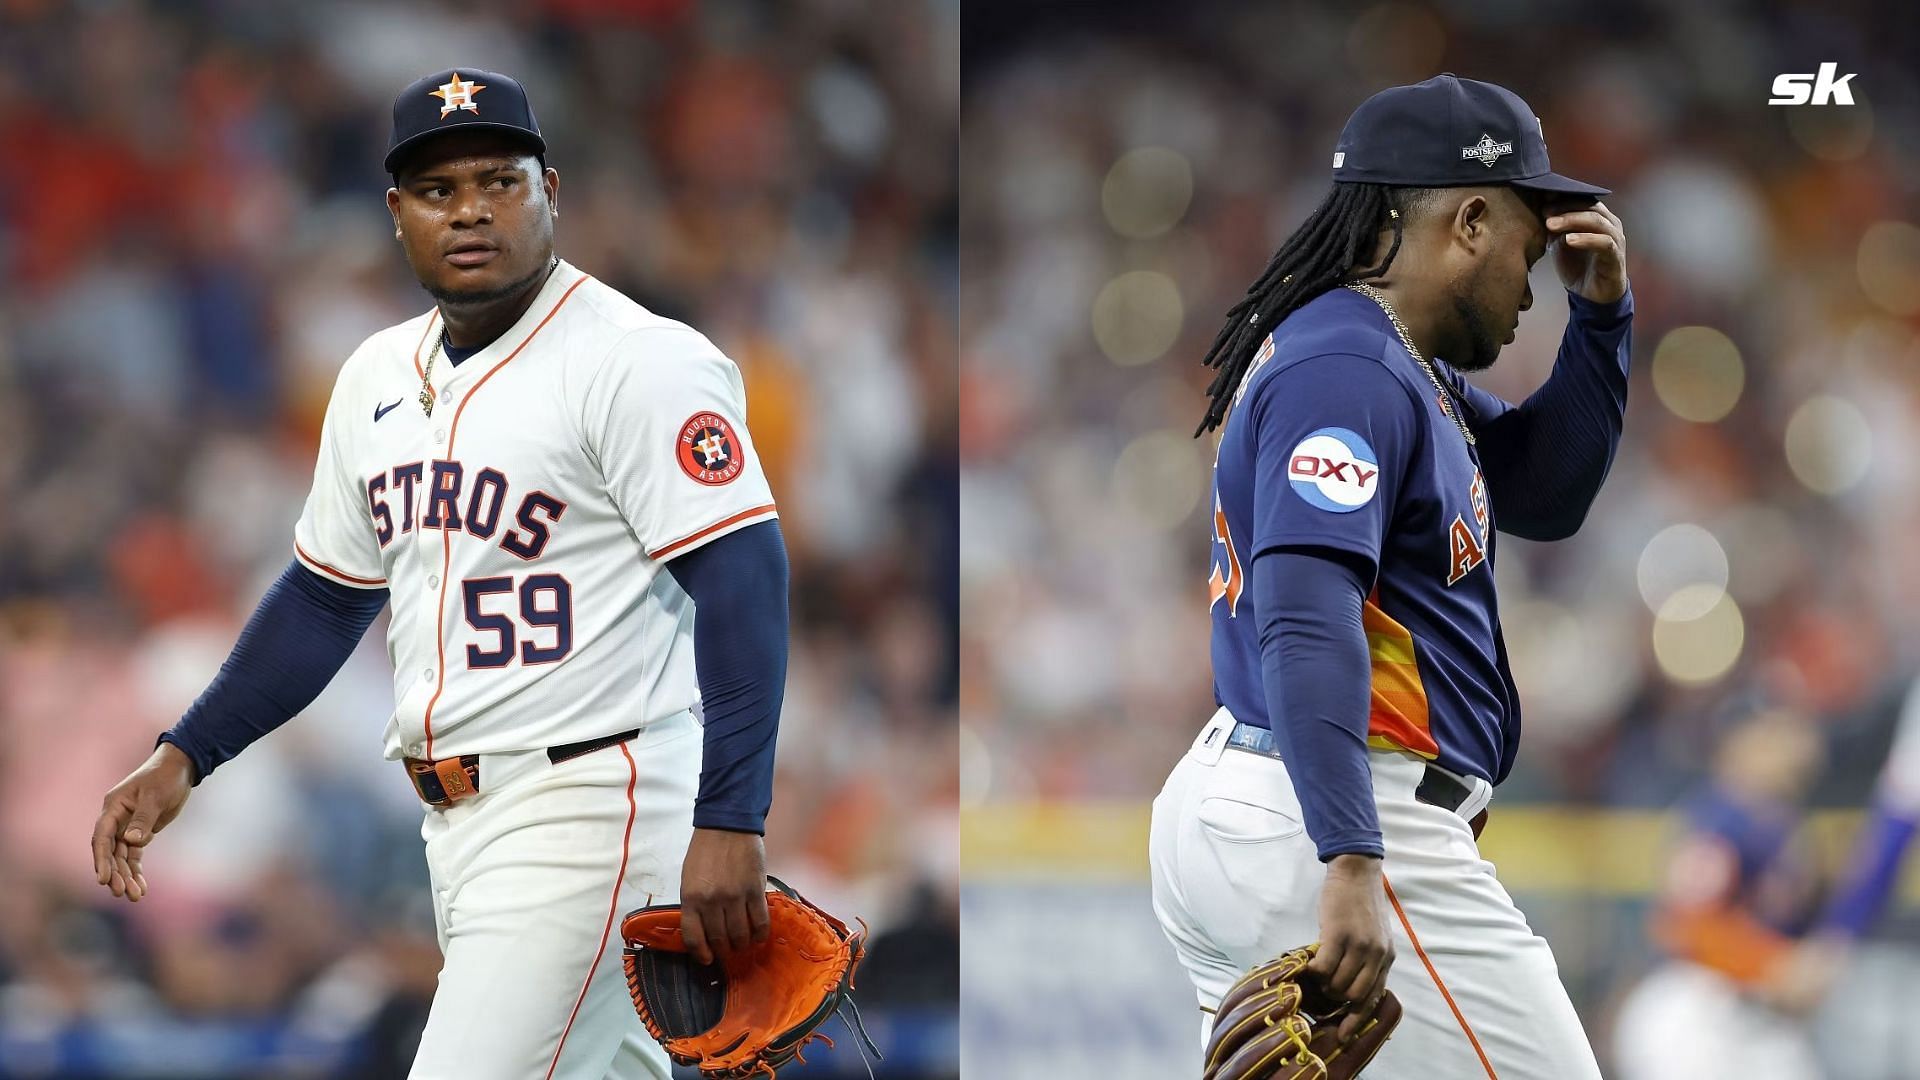 Framber Valdez Injury Update: Astros place star pitcher on 15-day IL with elbow inflammation 